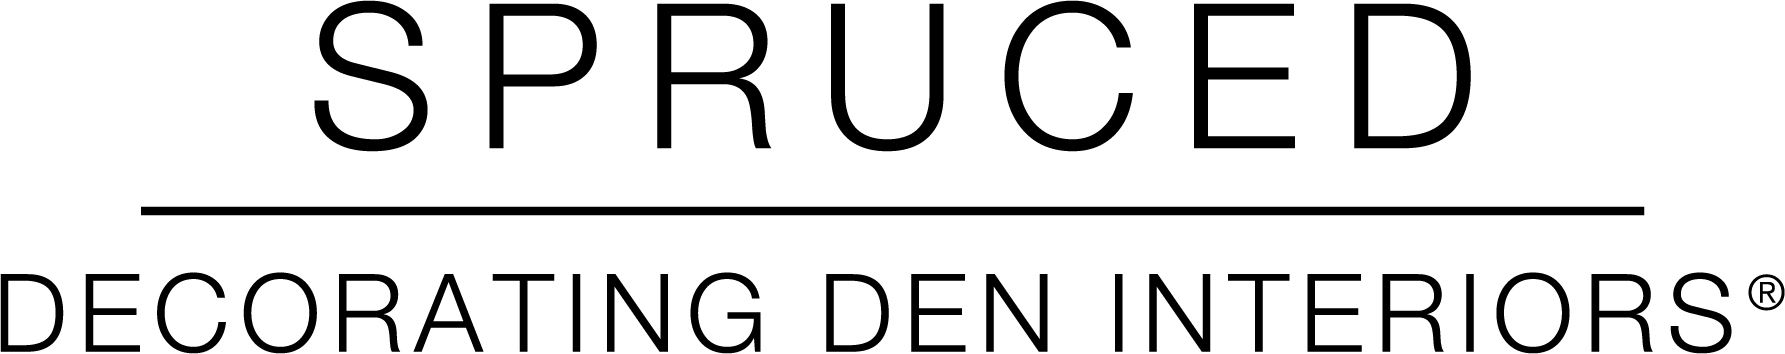 Spruced by Decorating Den Interiors Logo